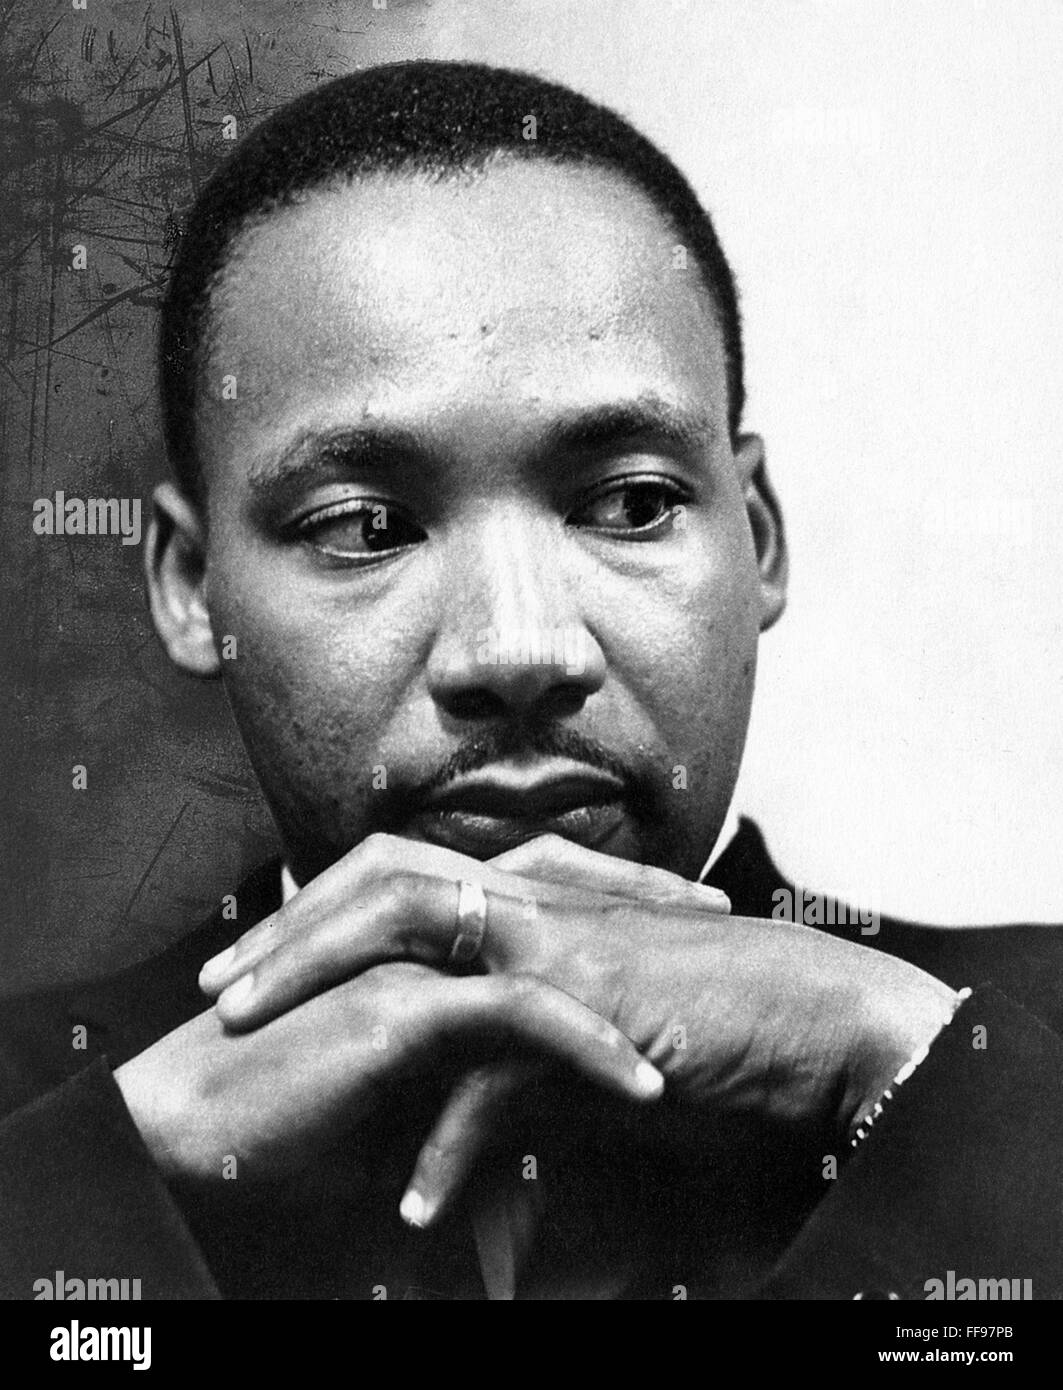 MARTIN LUTHER KING, JR. /n(1929-1968). American cleric and reformer. Photographed c1965. Stock Photo